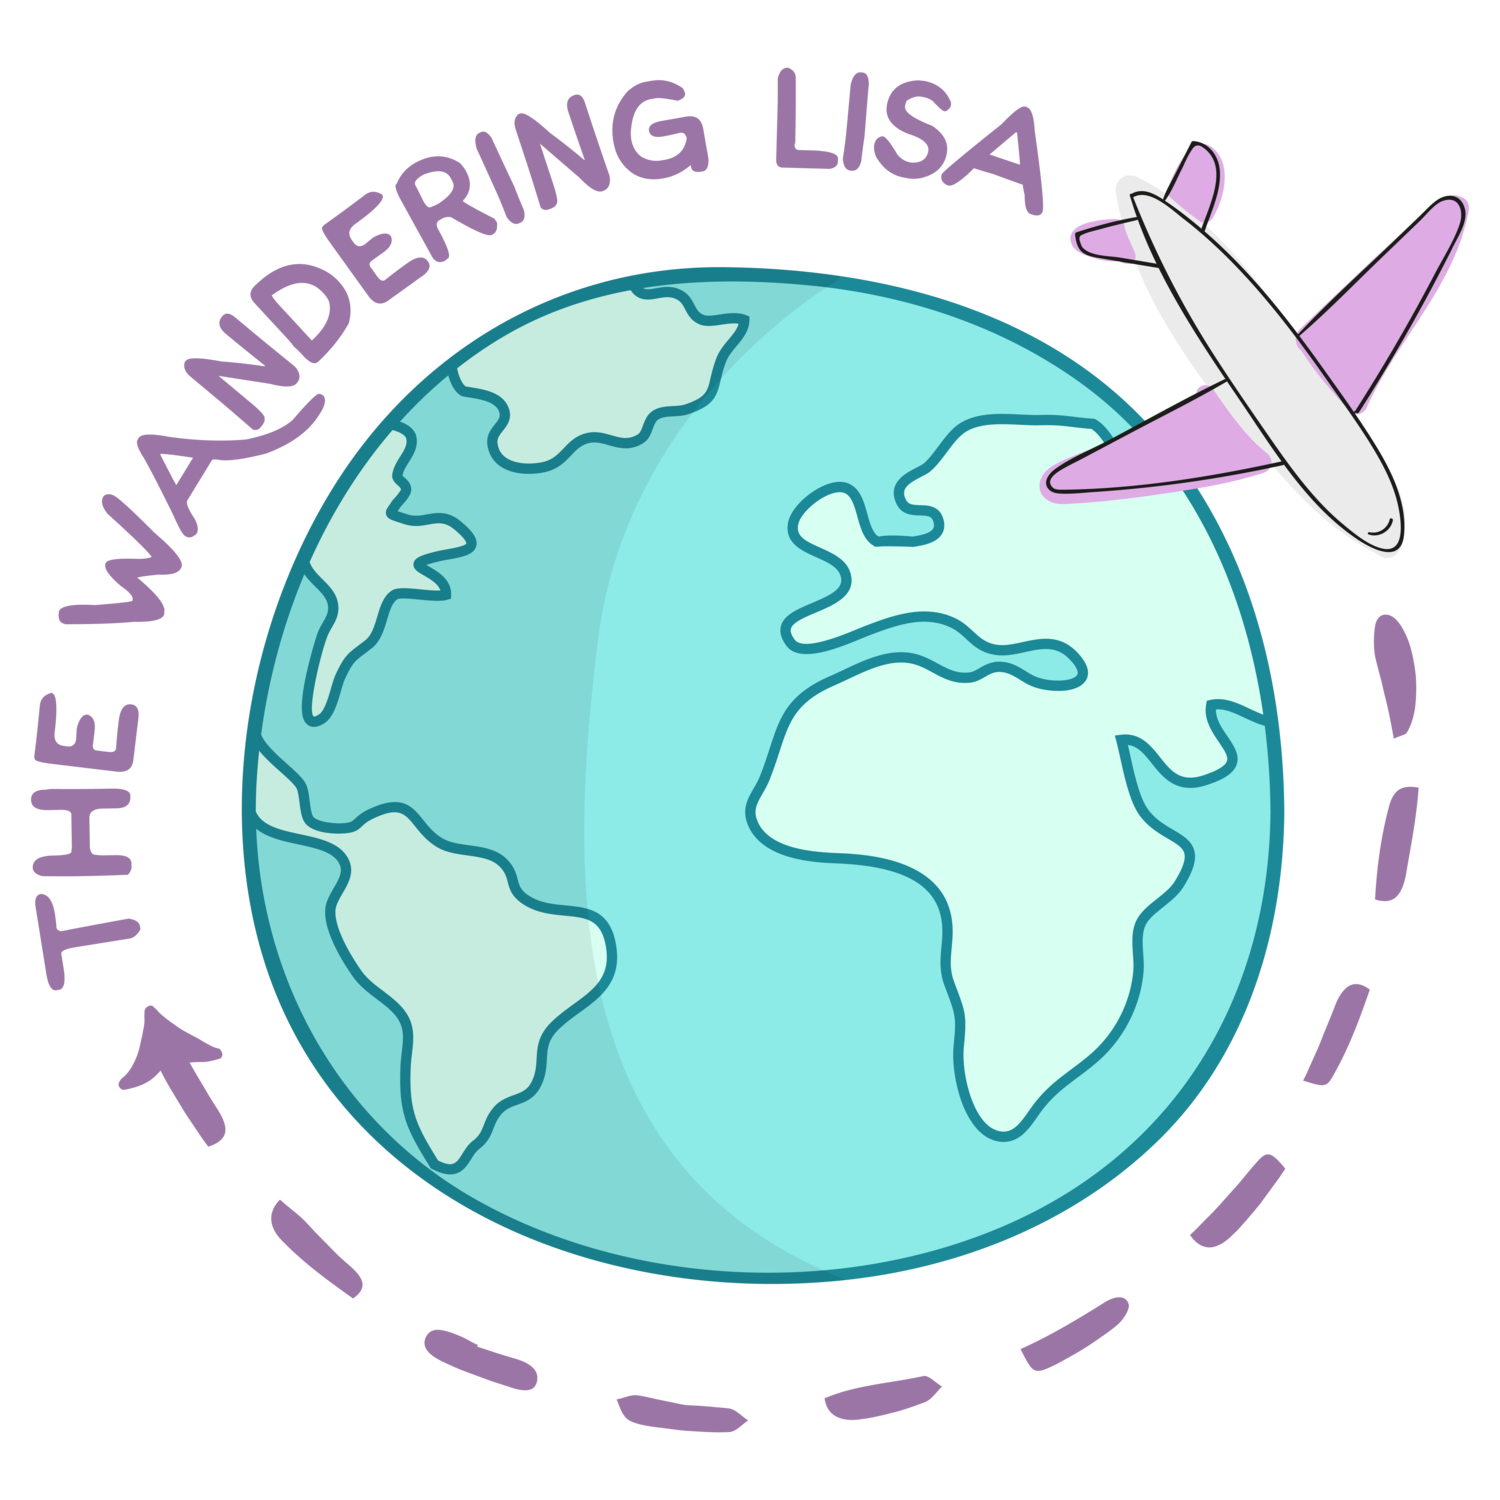 location clipart travel planning